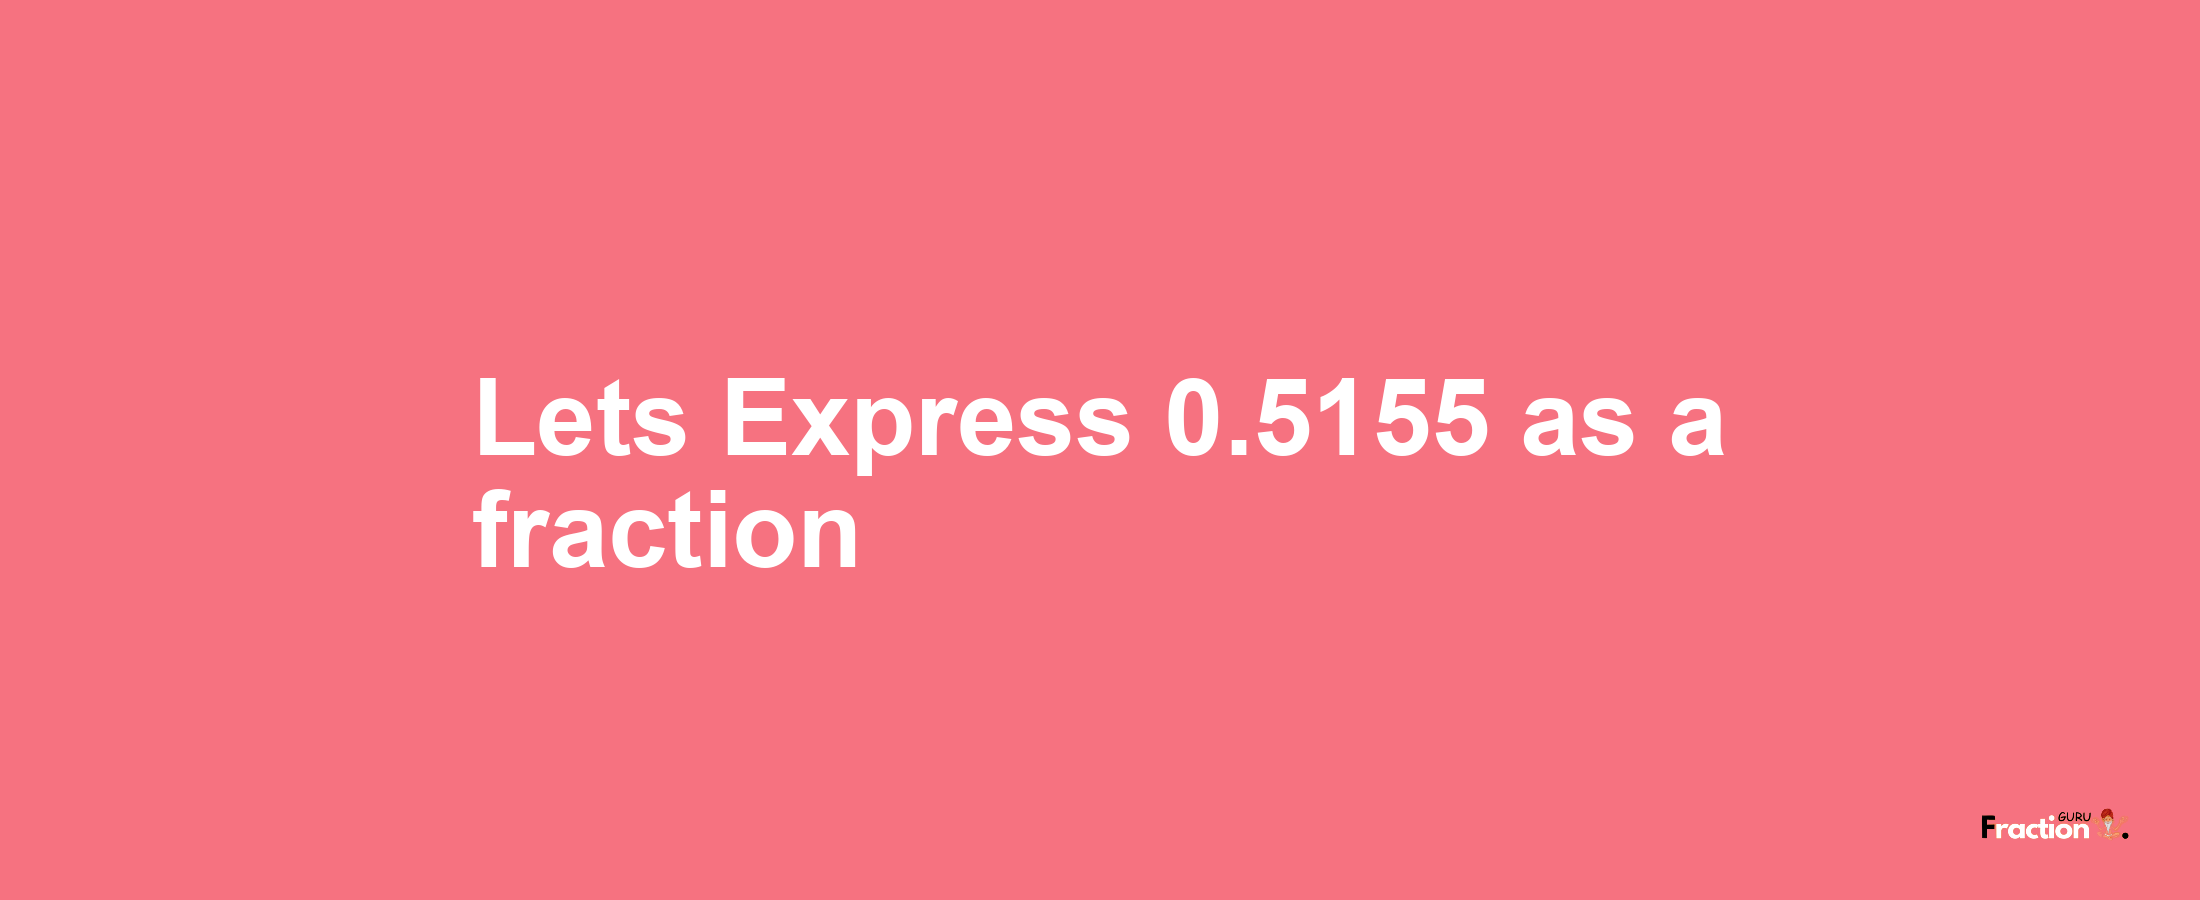 Lets Express 0.5155 as afraction